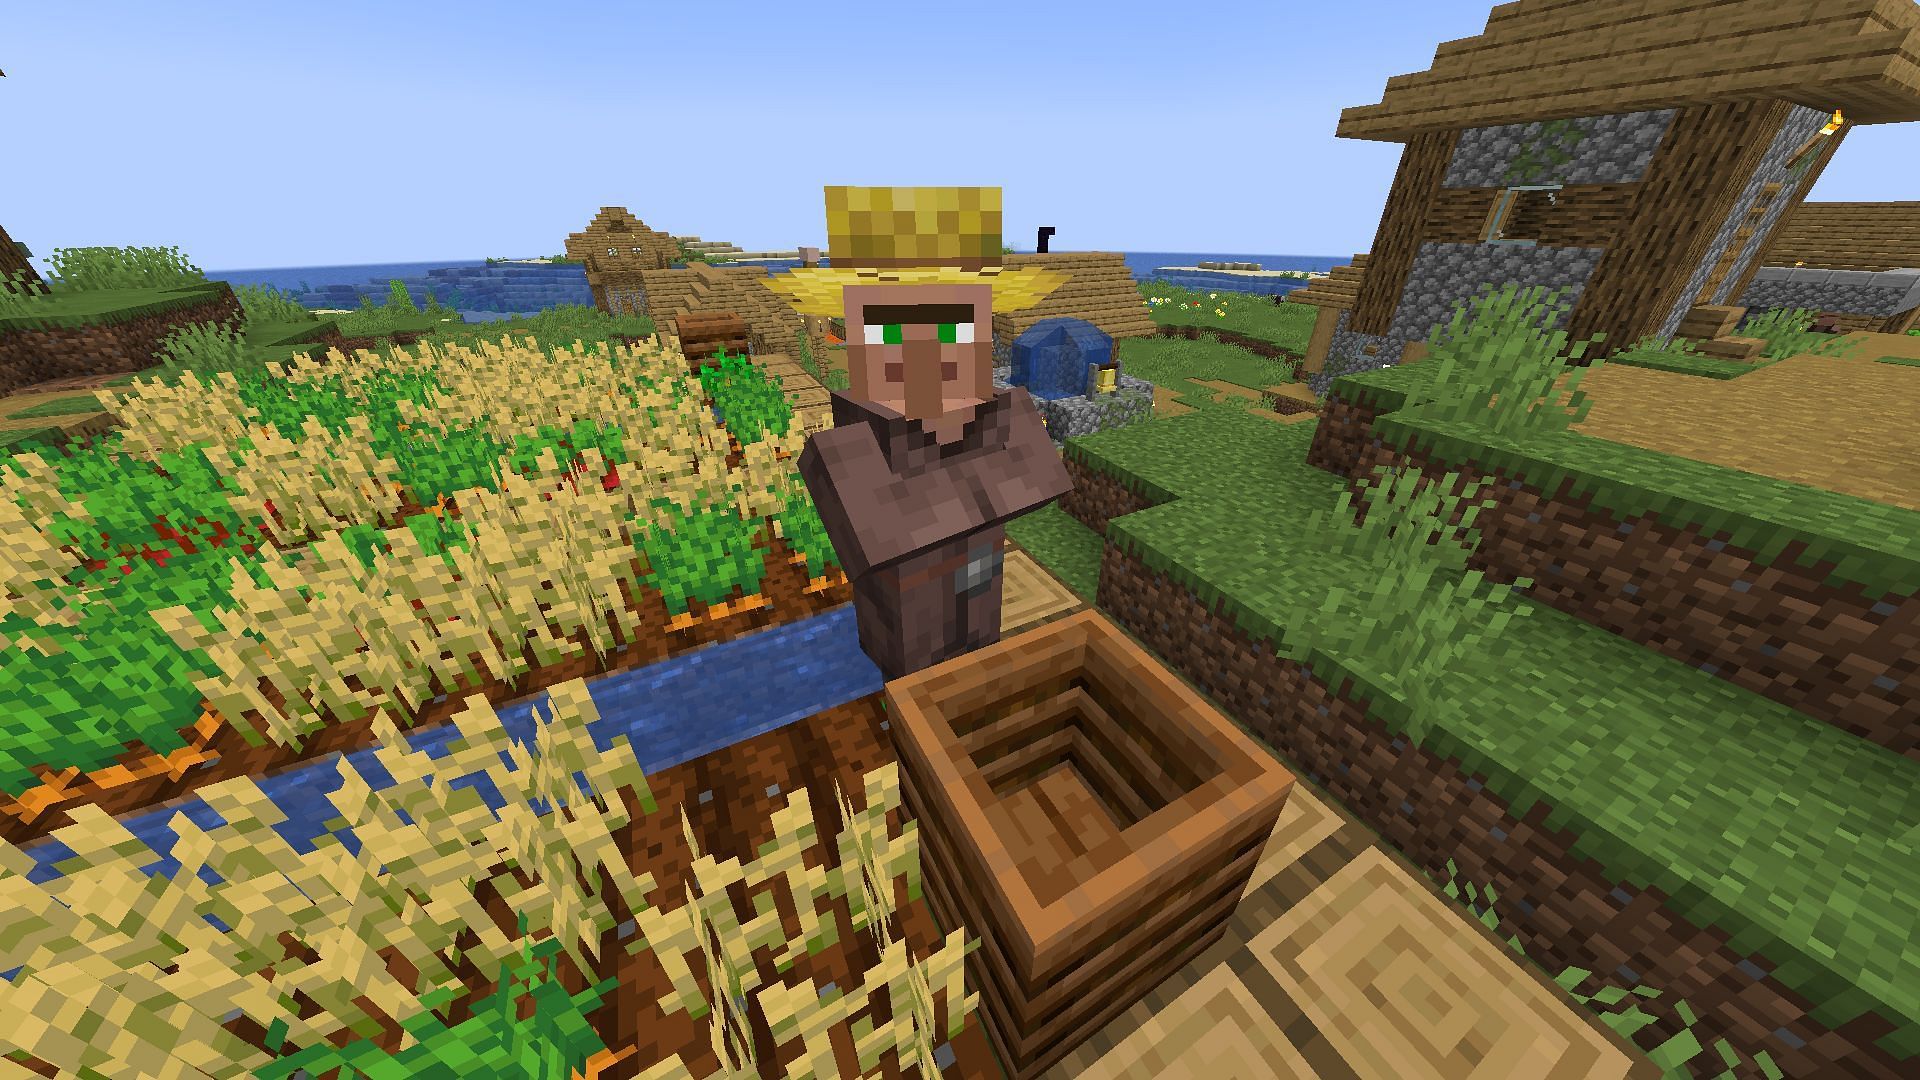 Farmers can take wheat for some emeralds in Minecraft (Image via Mojang)